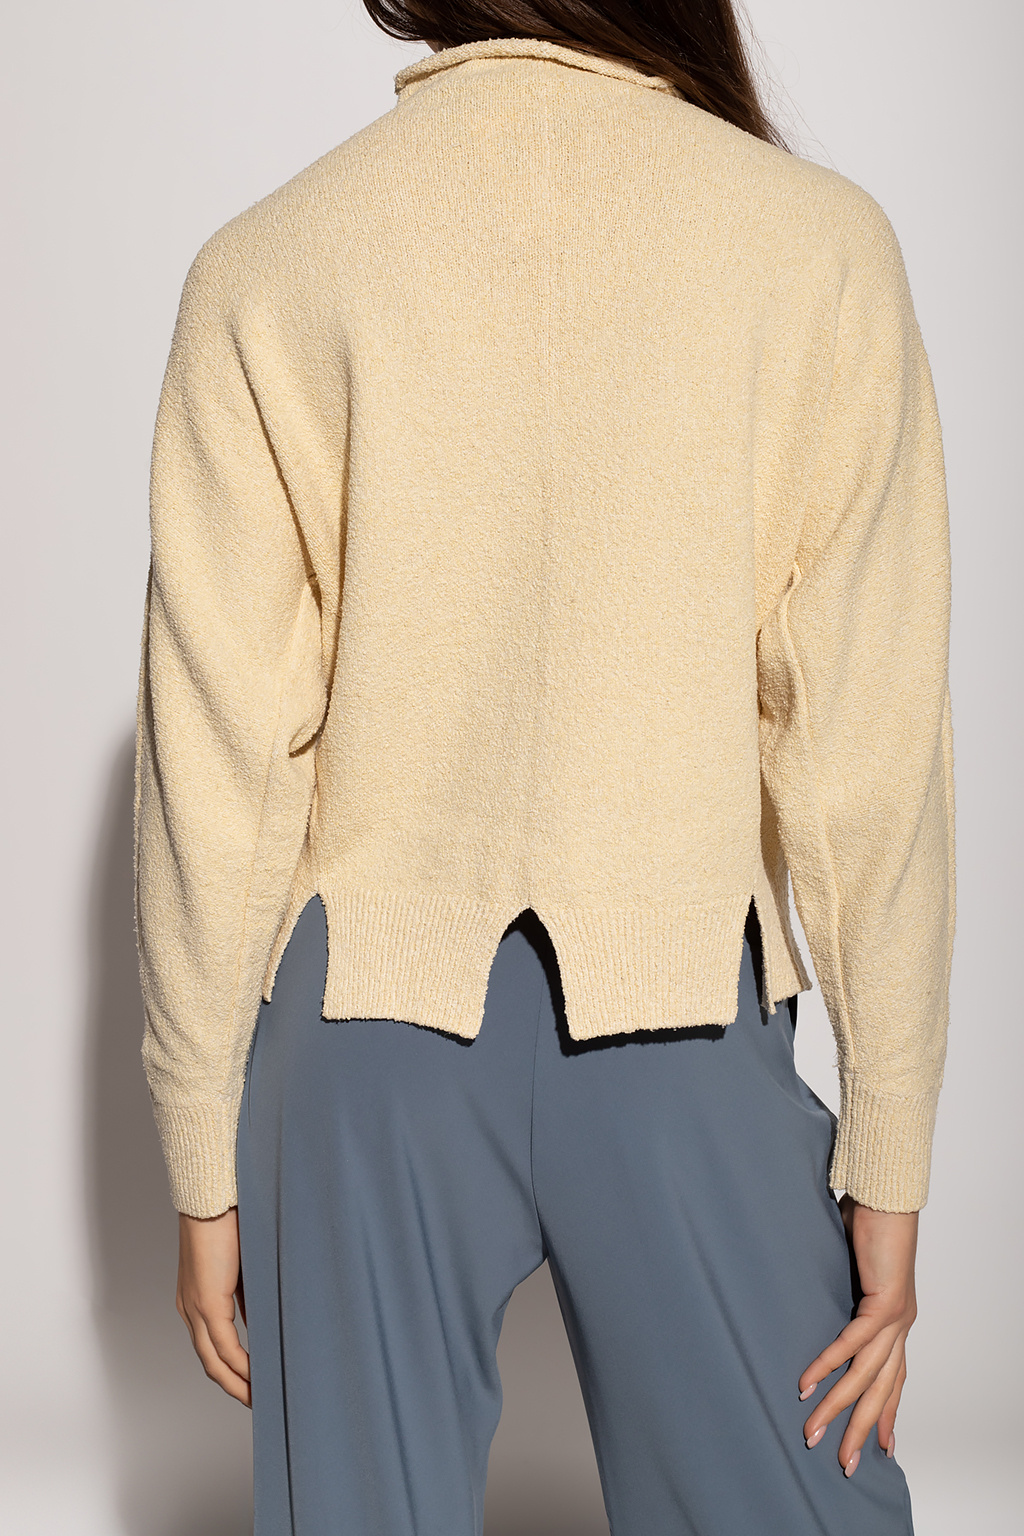 Proenza Schouler Sweater with high neck